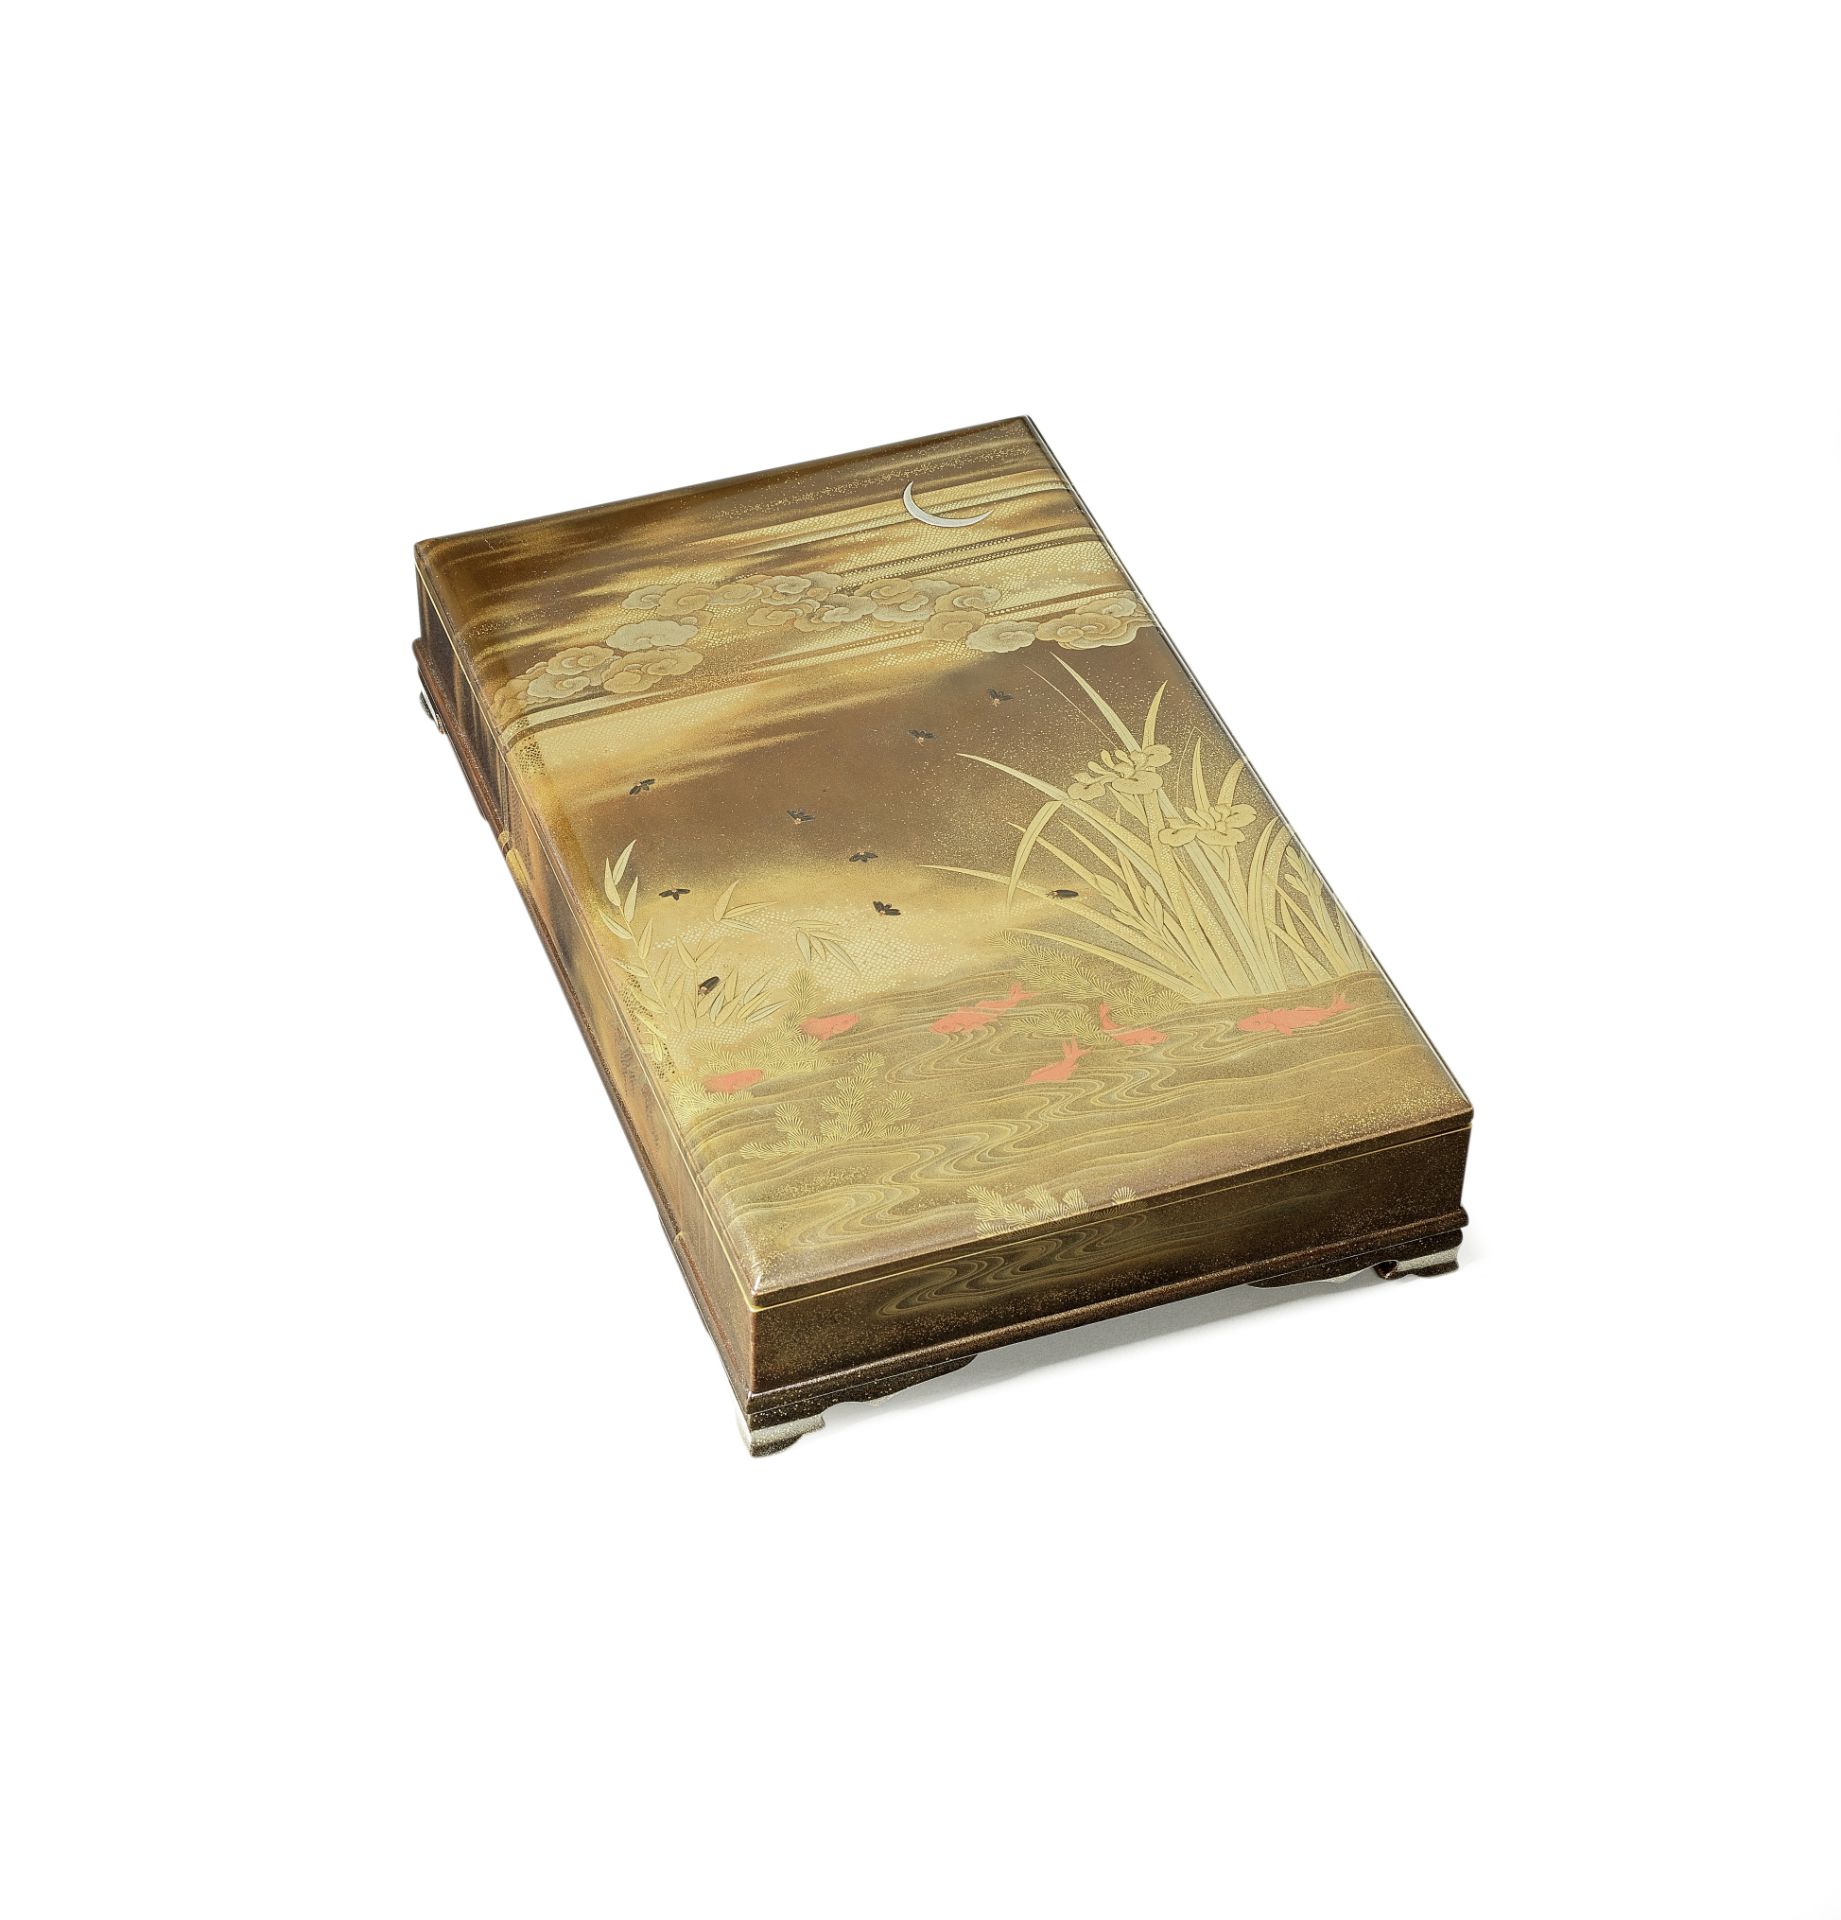 A GOLD-LACQUERED RECTANGULAR BOX AND COVER Edo (1615-1868) period or Meiji era (1868-1912), mid-...